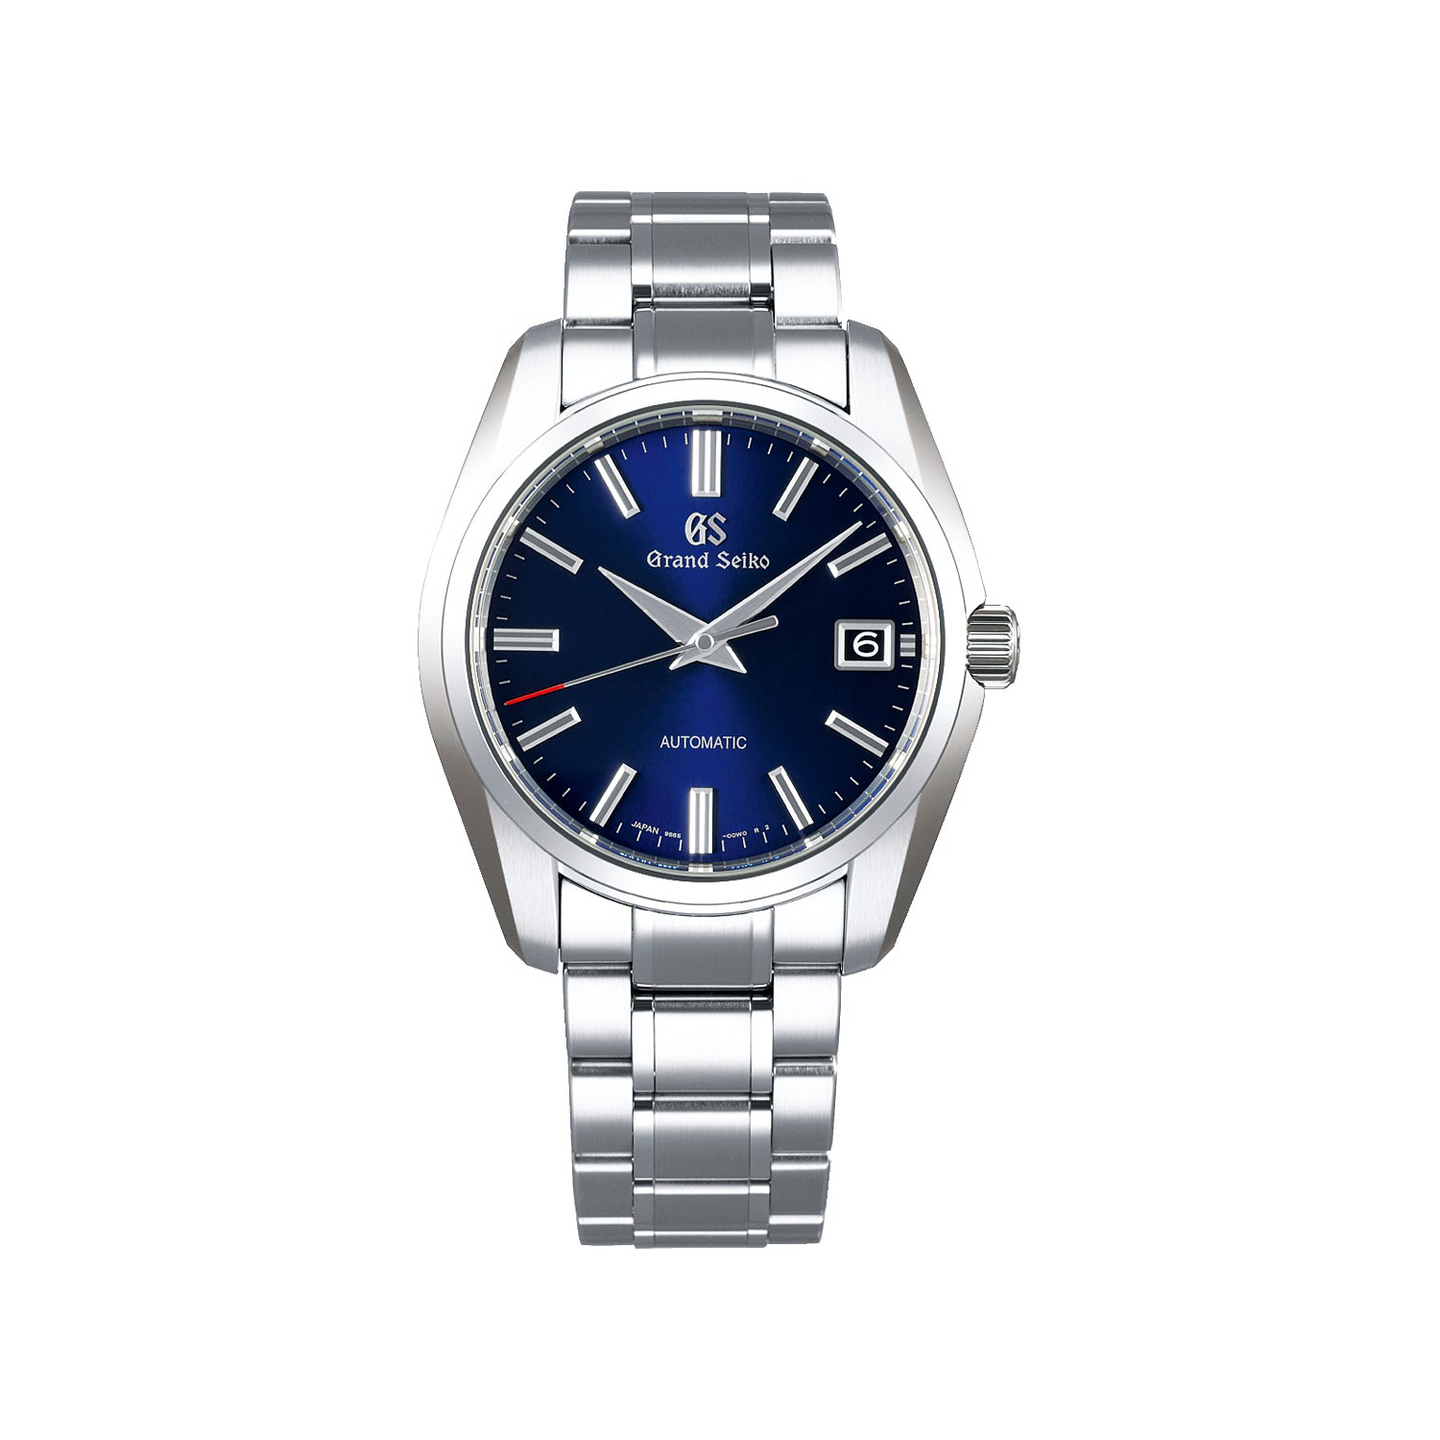 Limited Edition Grand Seiko Heritage Watch | Fink's